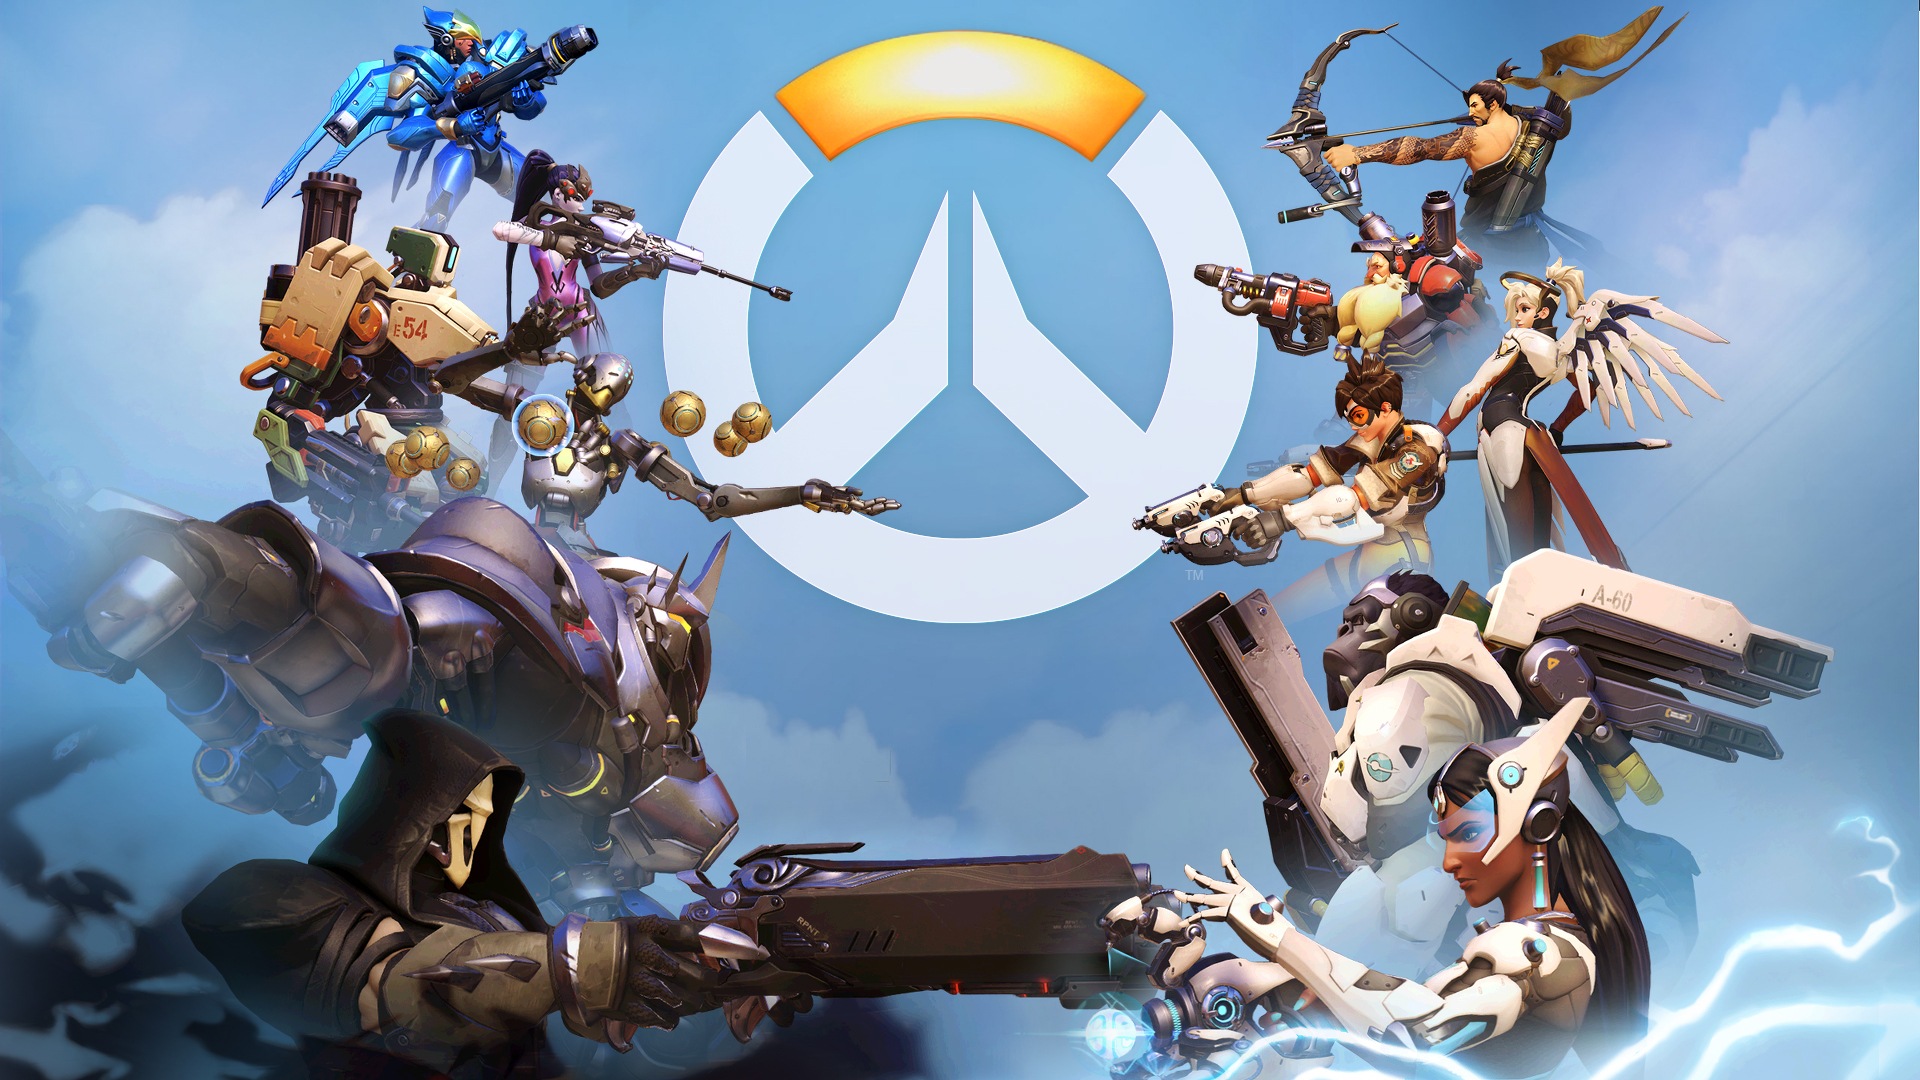 Overwatch, hot game HD wallpapers #13 - 1920x1080